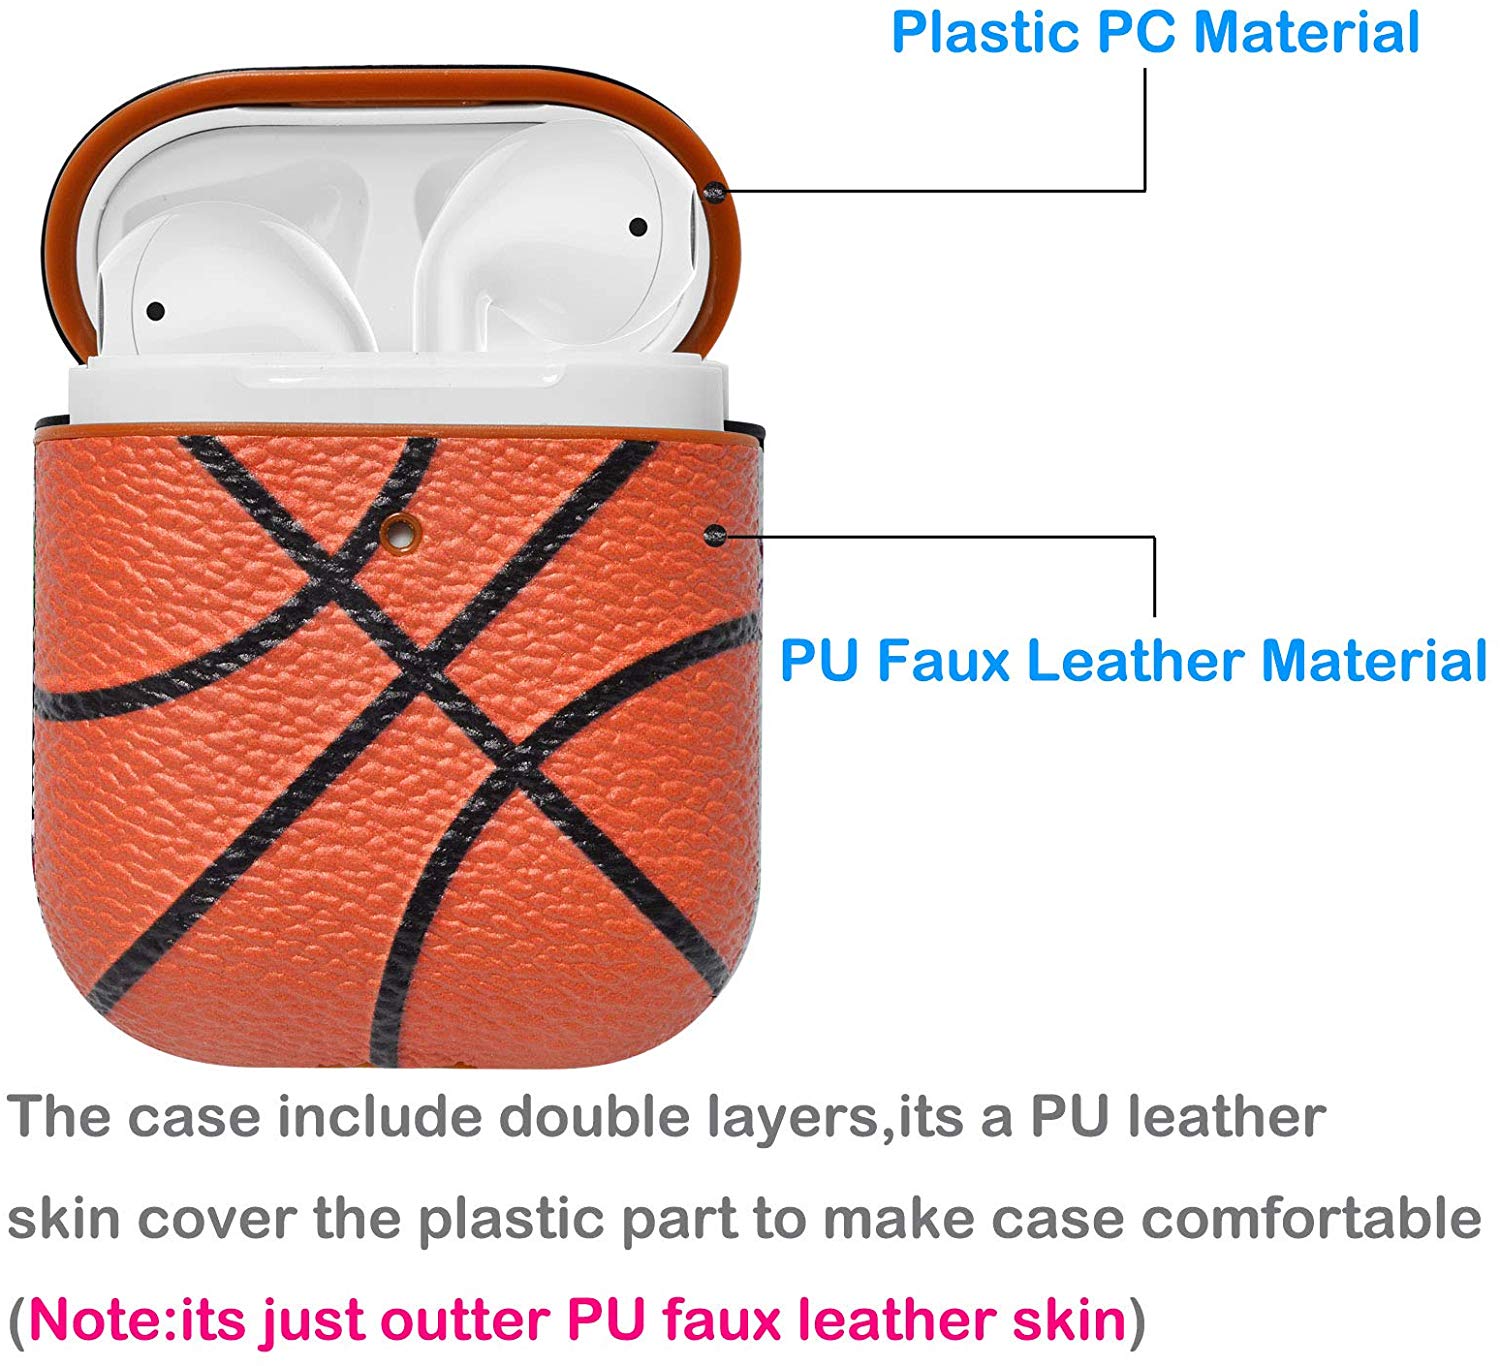 Apple Airpods Case Skin, Takfox AirPods Accessories Case for Airpods 1 & 2 Portable Protective Anti-Scratch PU Leather Cover Skin for Airpods 1 & AirPods 2 [Front LED Visible] w/ Keychain -Basketball - image 5 of 9